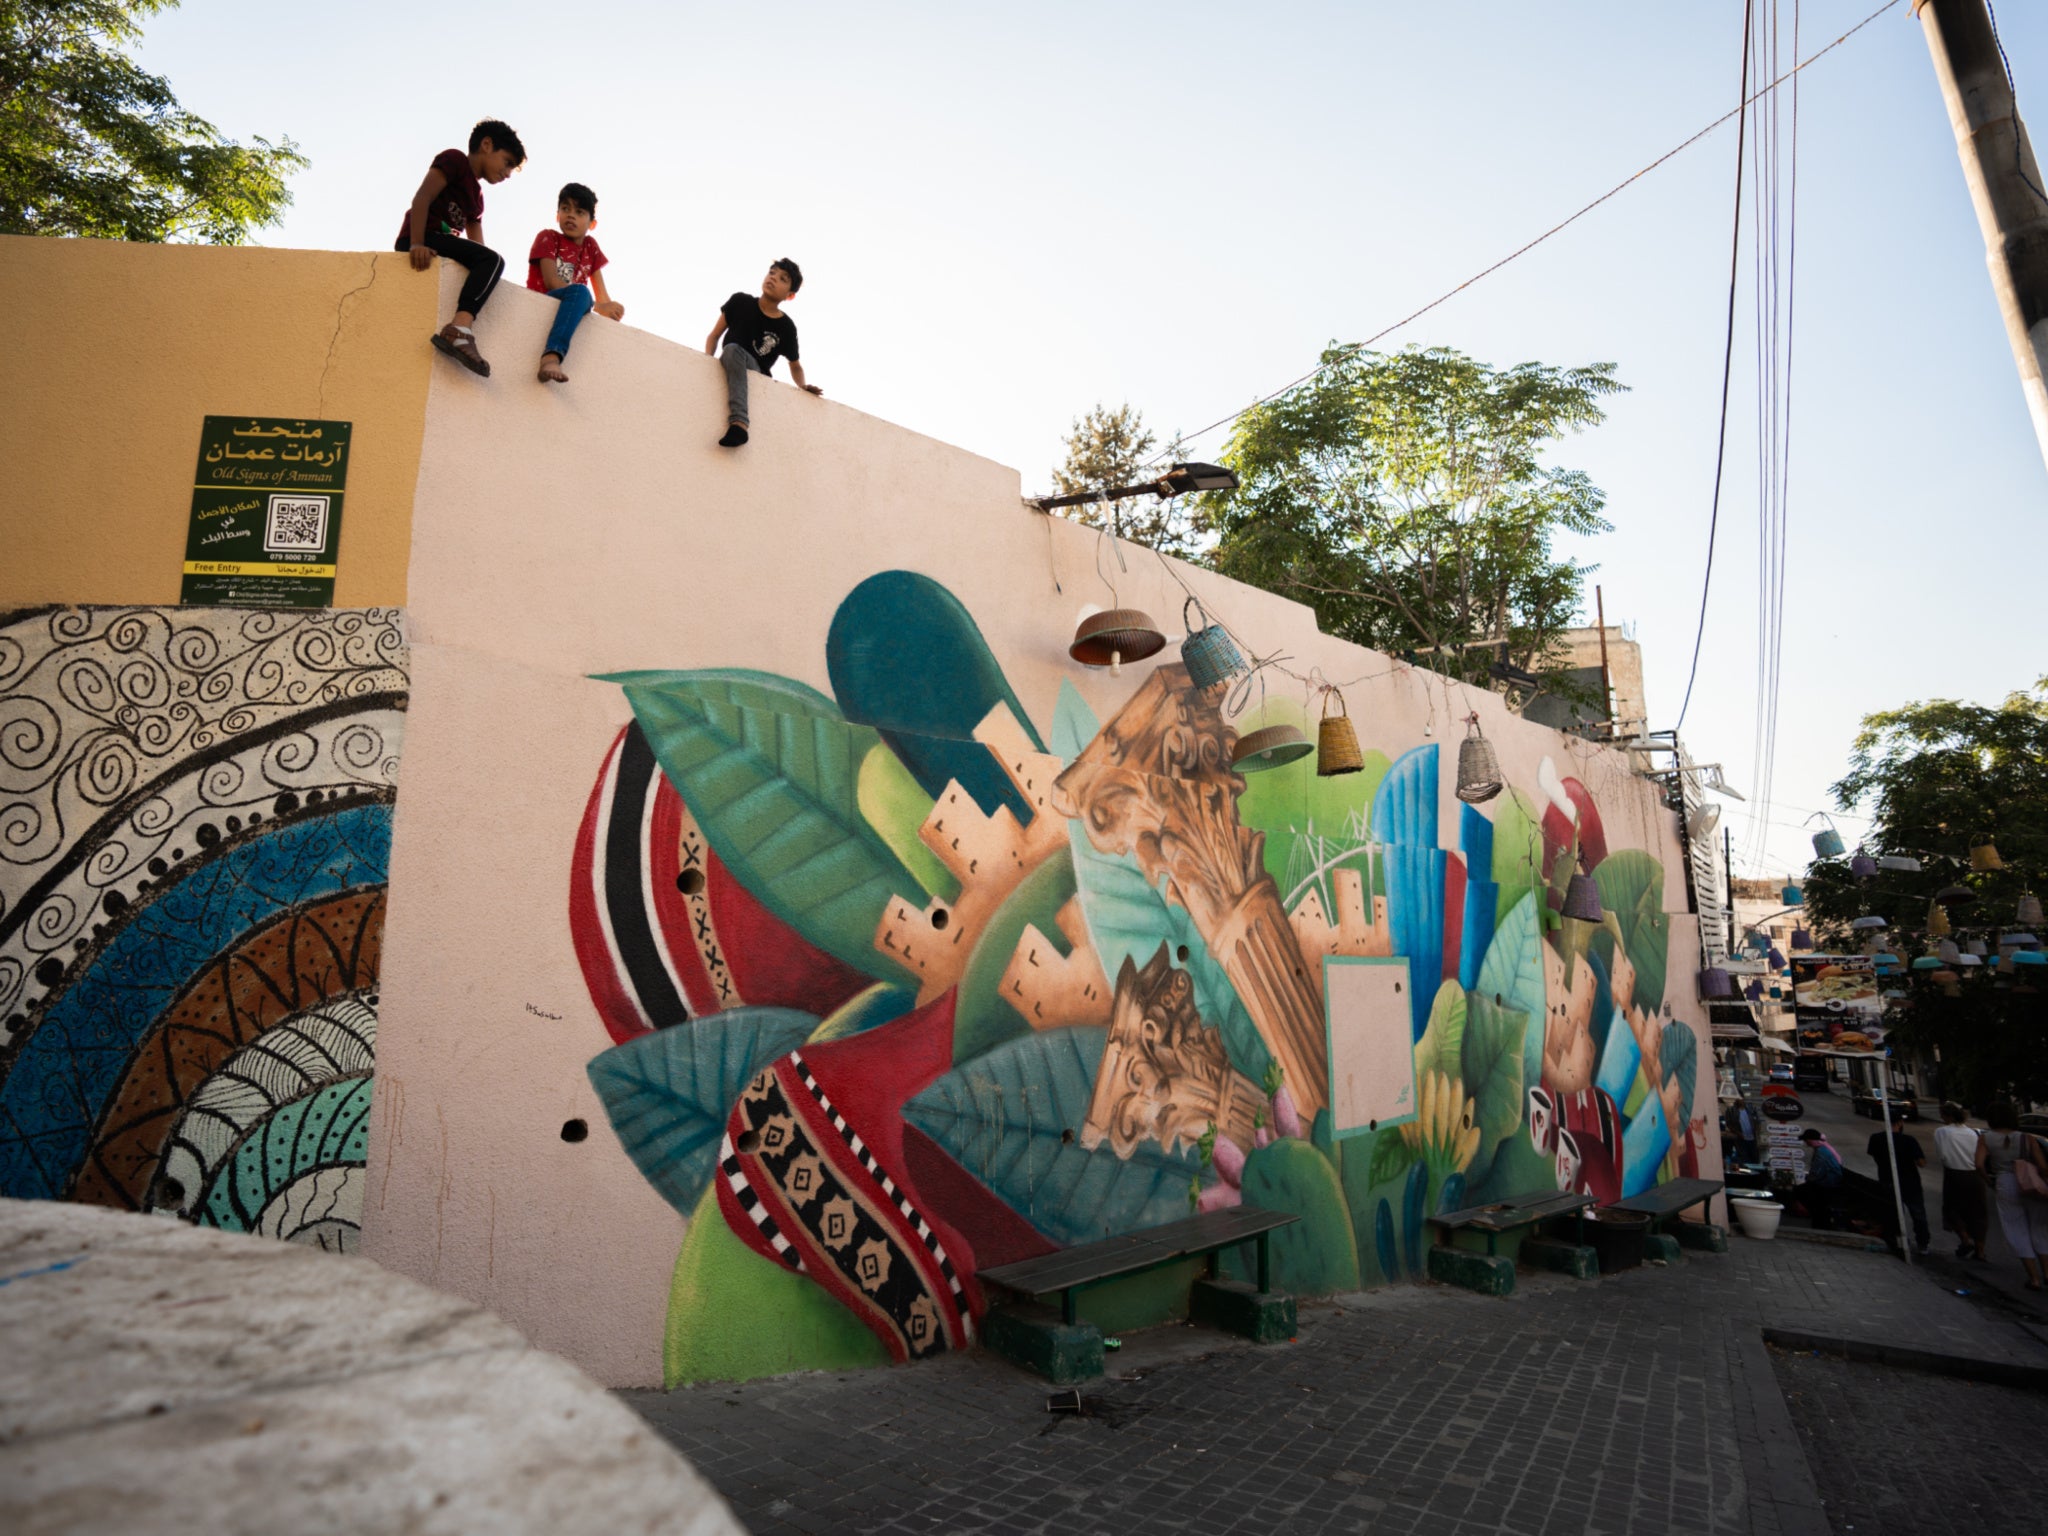 Many of Amman’s buildings are painted with colourful street art murals